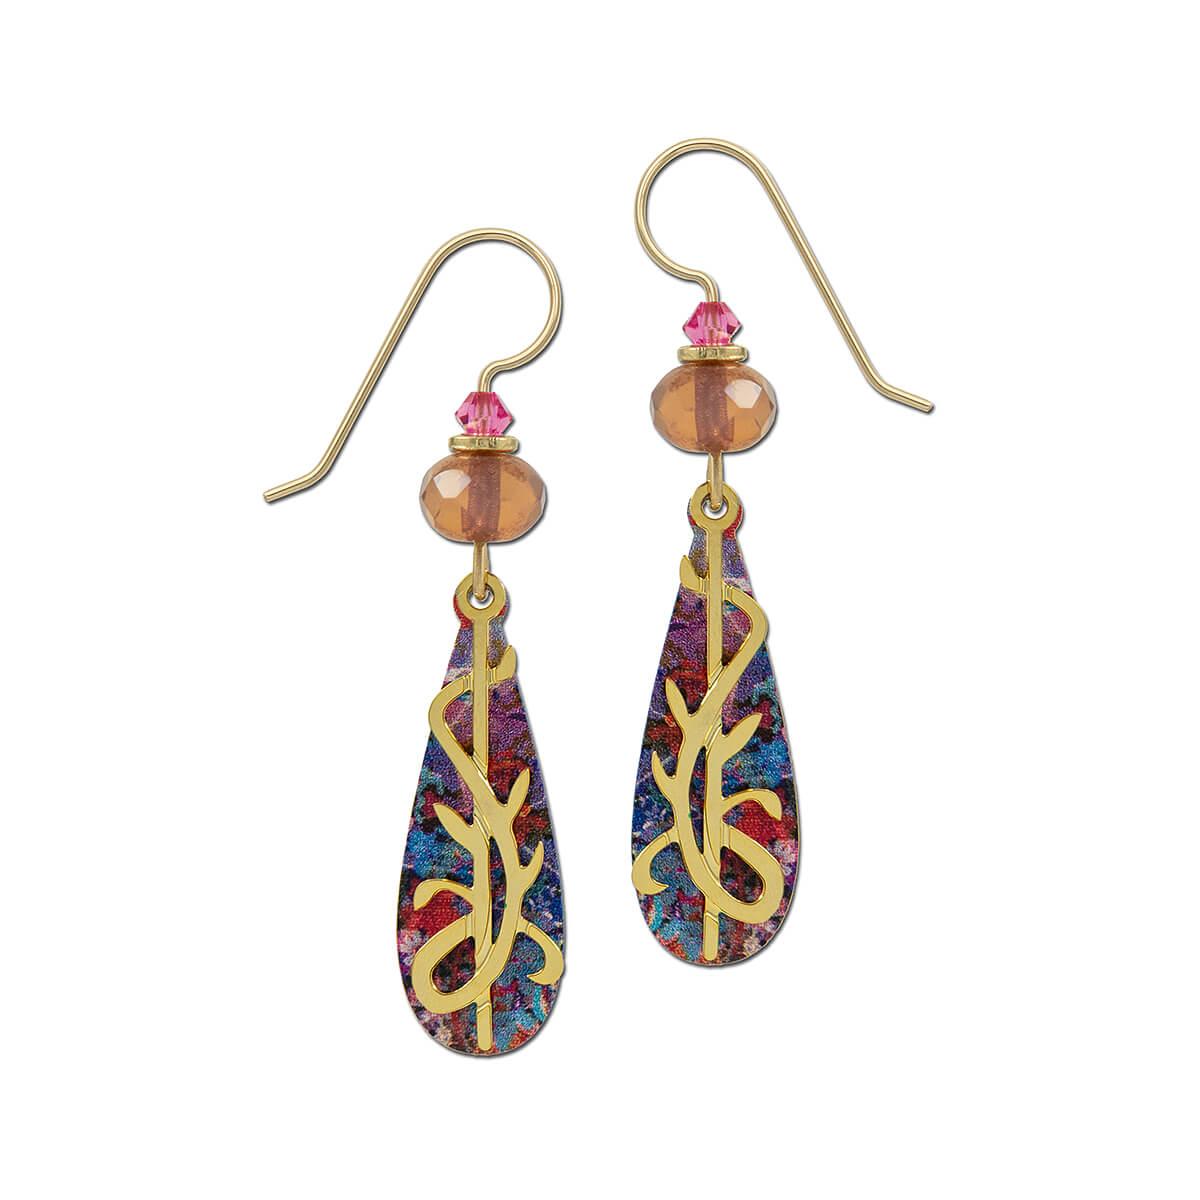  Colorful Long Teardrop With Shiny Gold Plated Vines Overlay Earrings